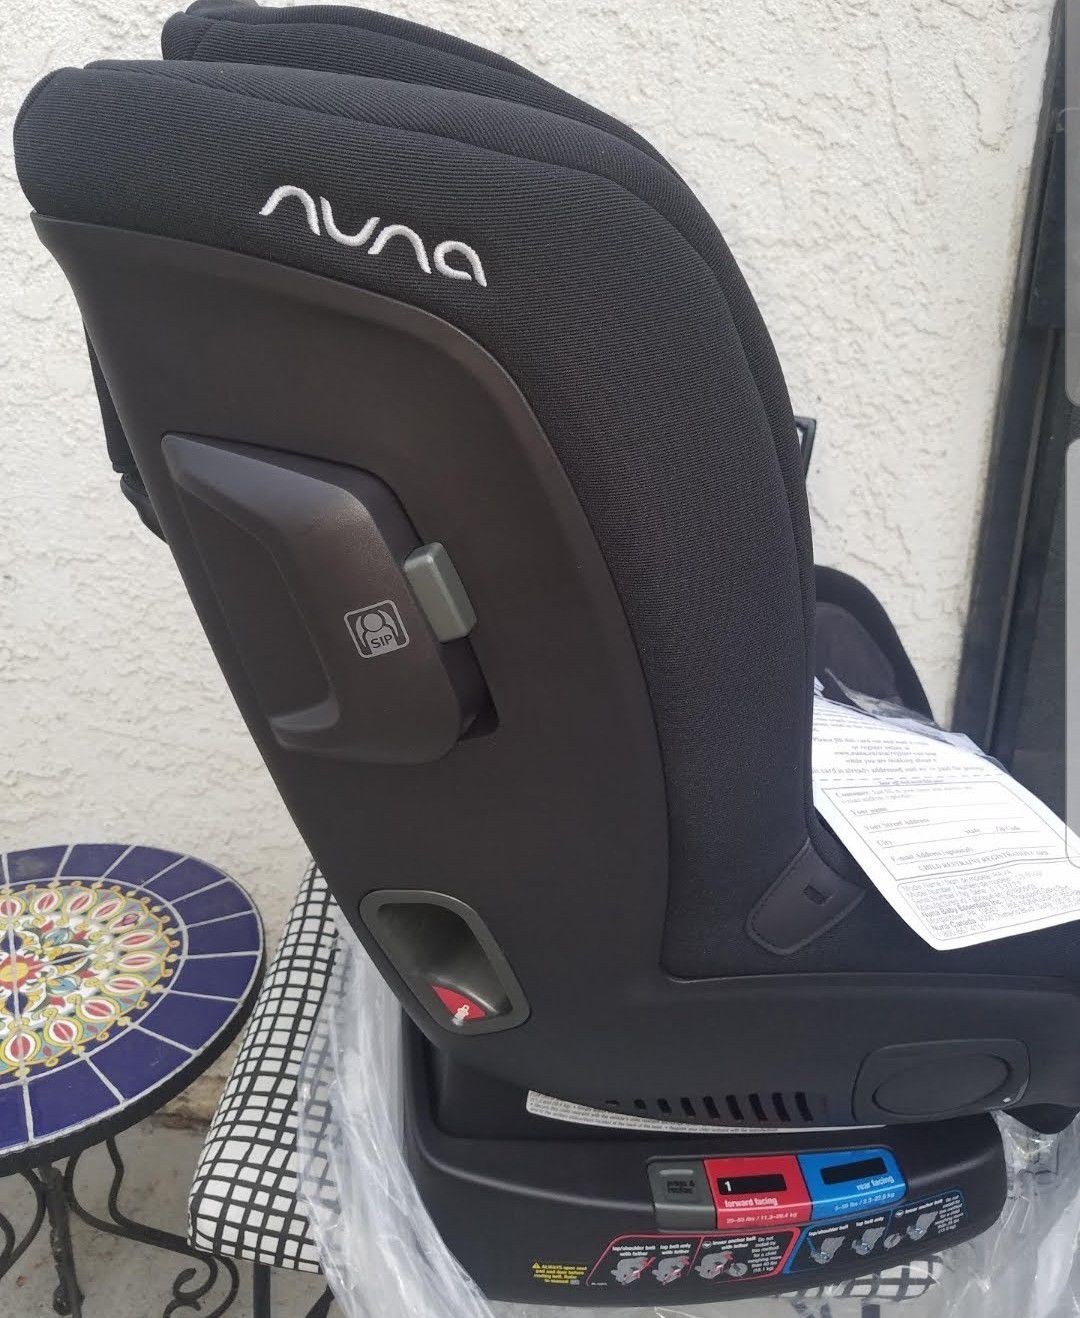 Brand new Nuna and Stokke car seat. Asking price is $300.00 each. All are brand new and steel in the box. Photo of original ones.